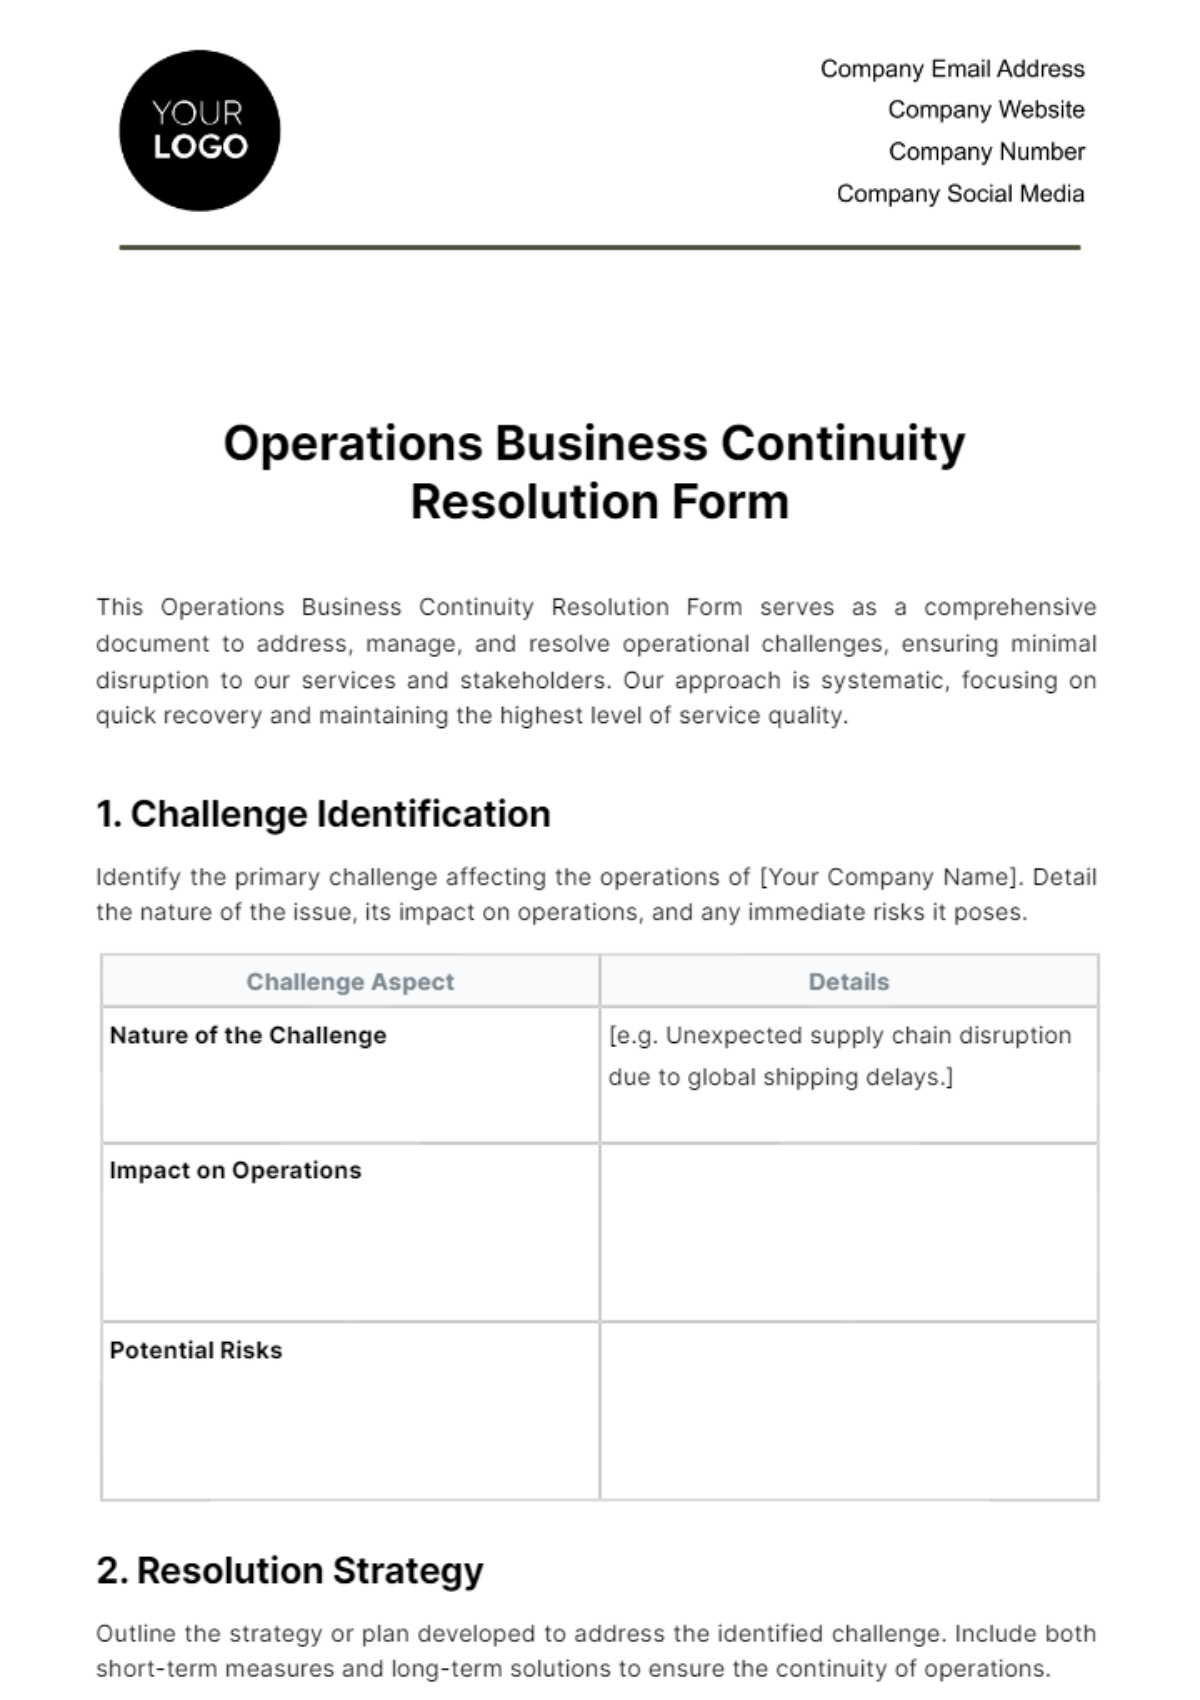 Operations Business Continuity Resolution Form Template